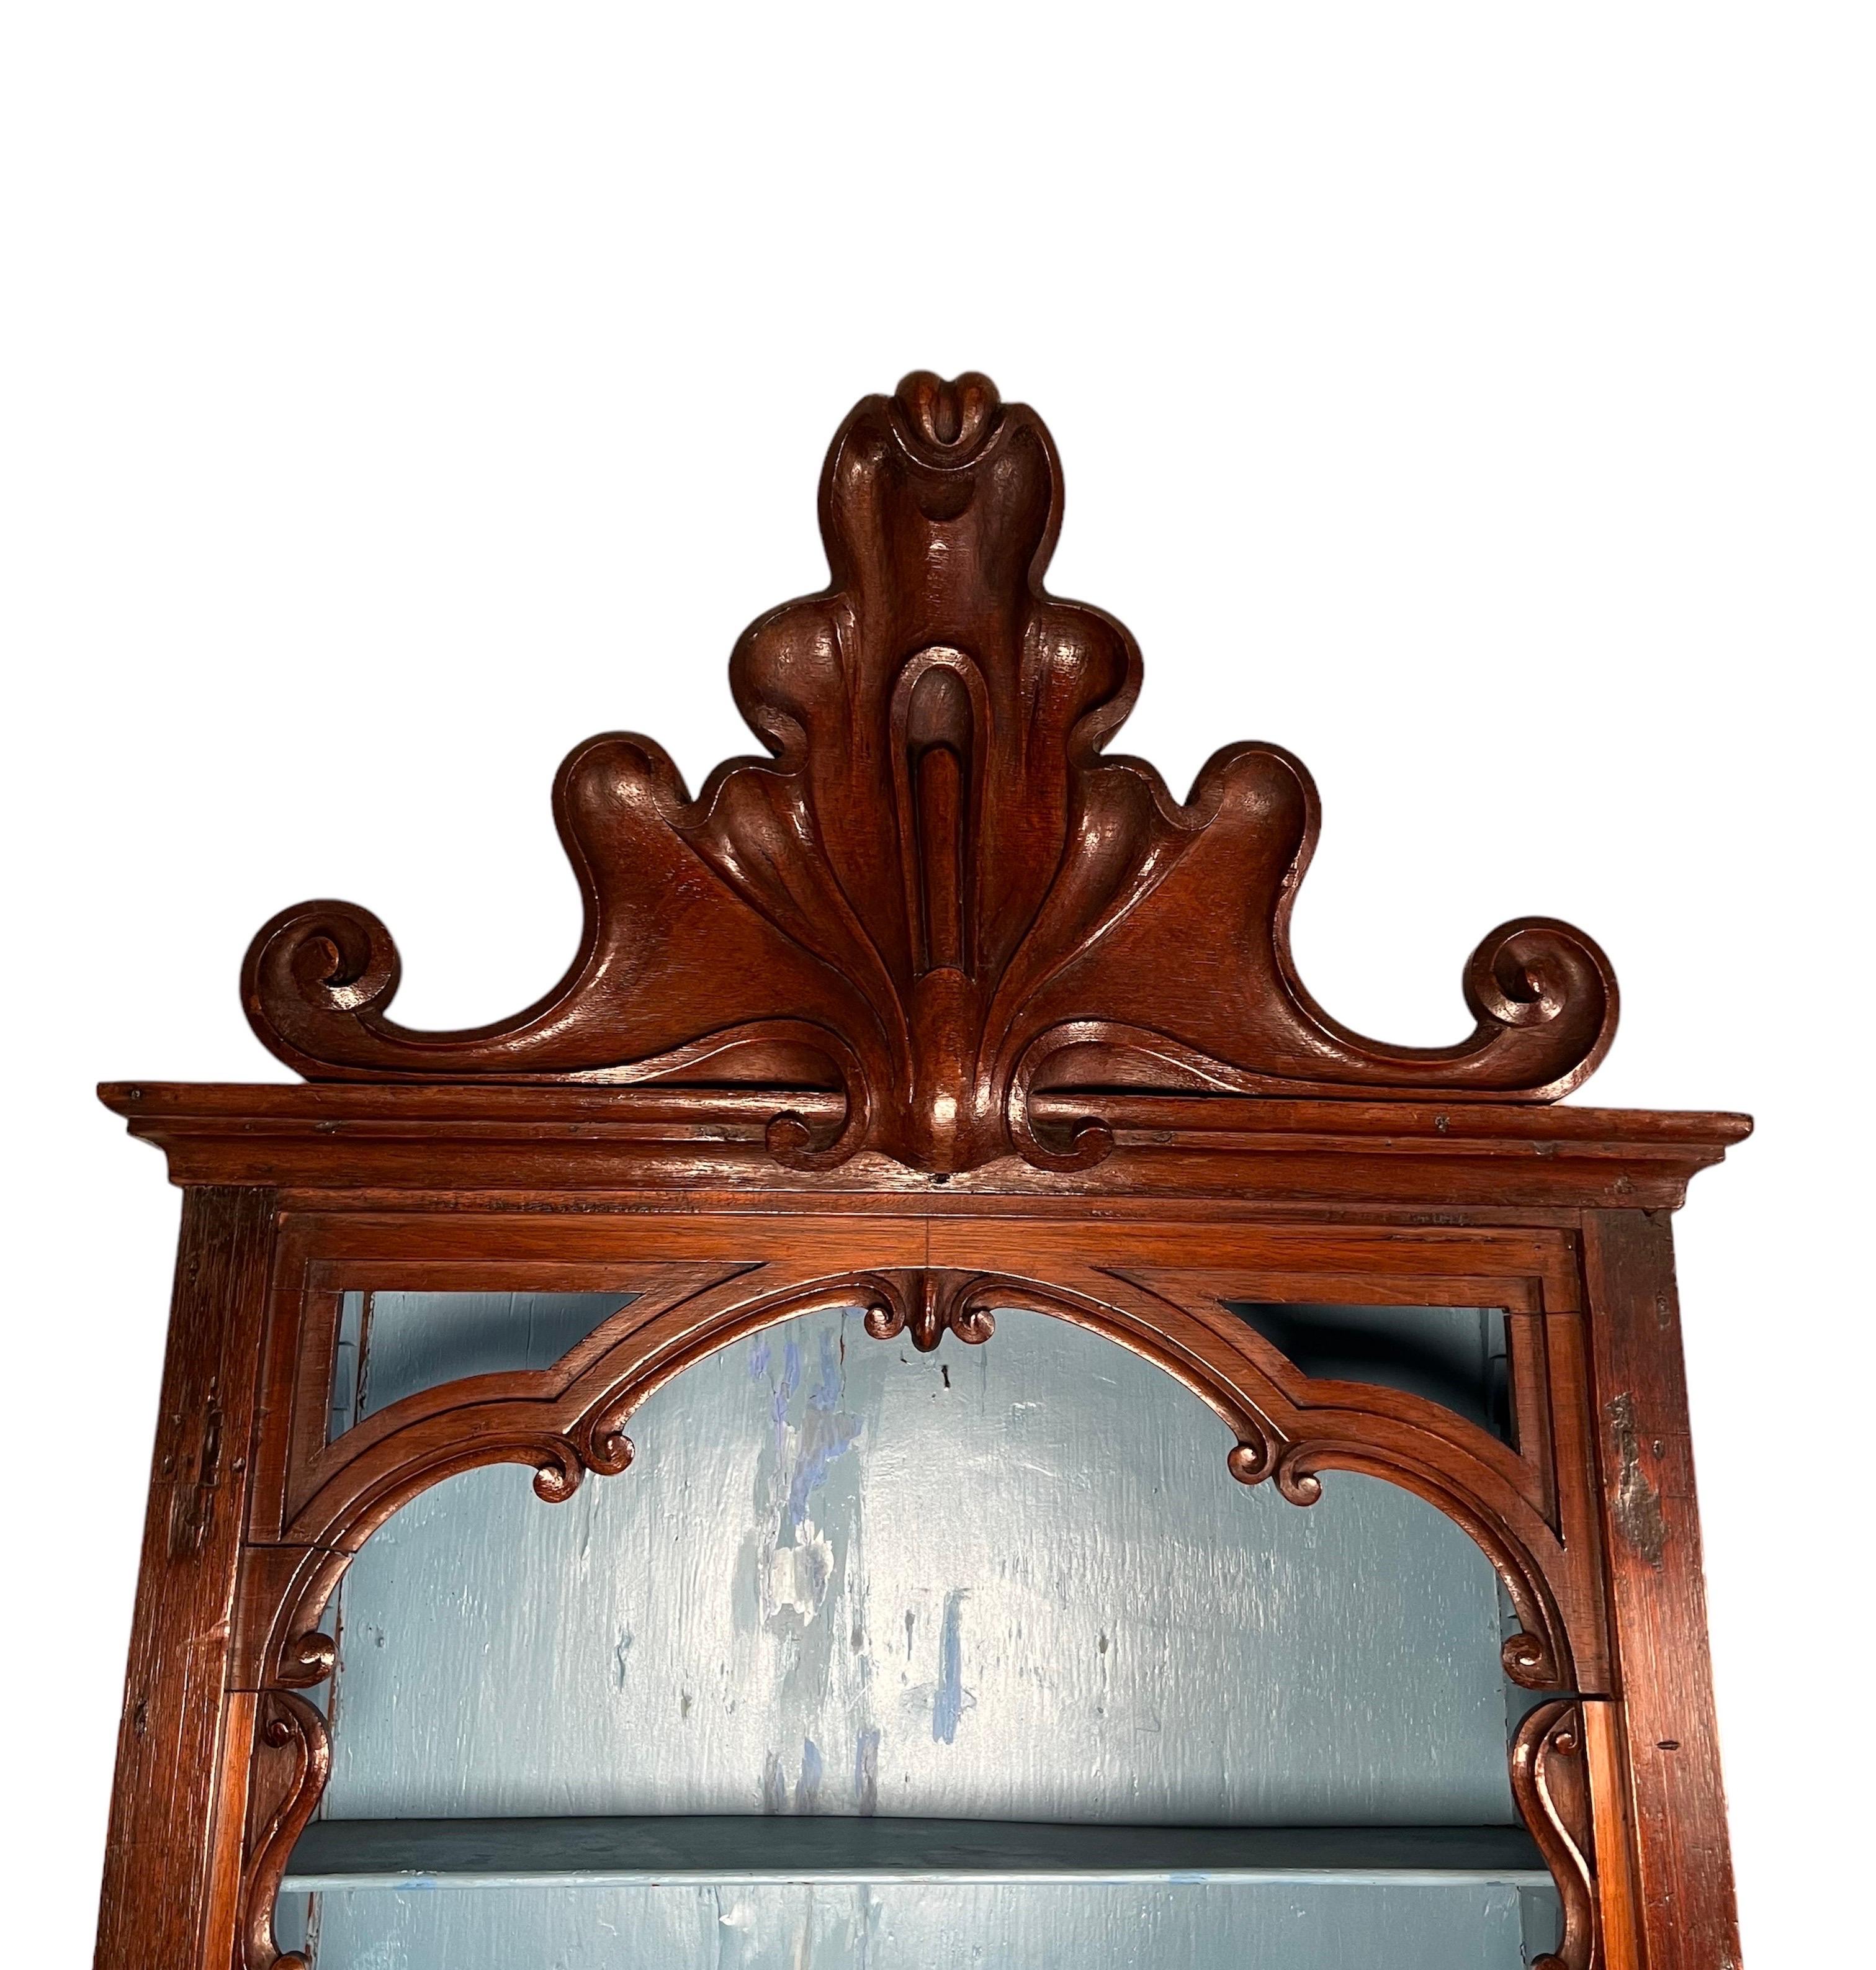 Portuguese, colonial carved hanging shelf. The shelf has two adjustable shelves with a large carved cresting molded base & crown.